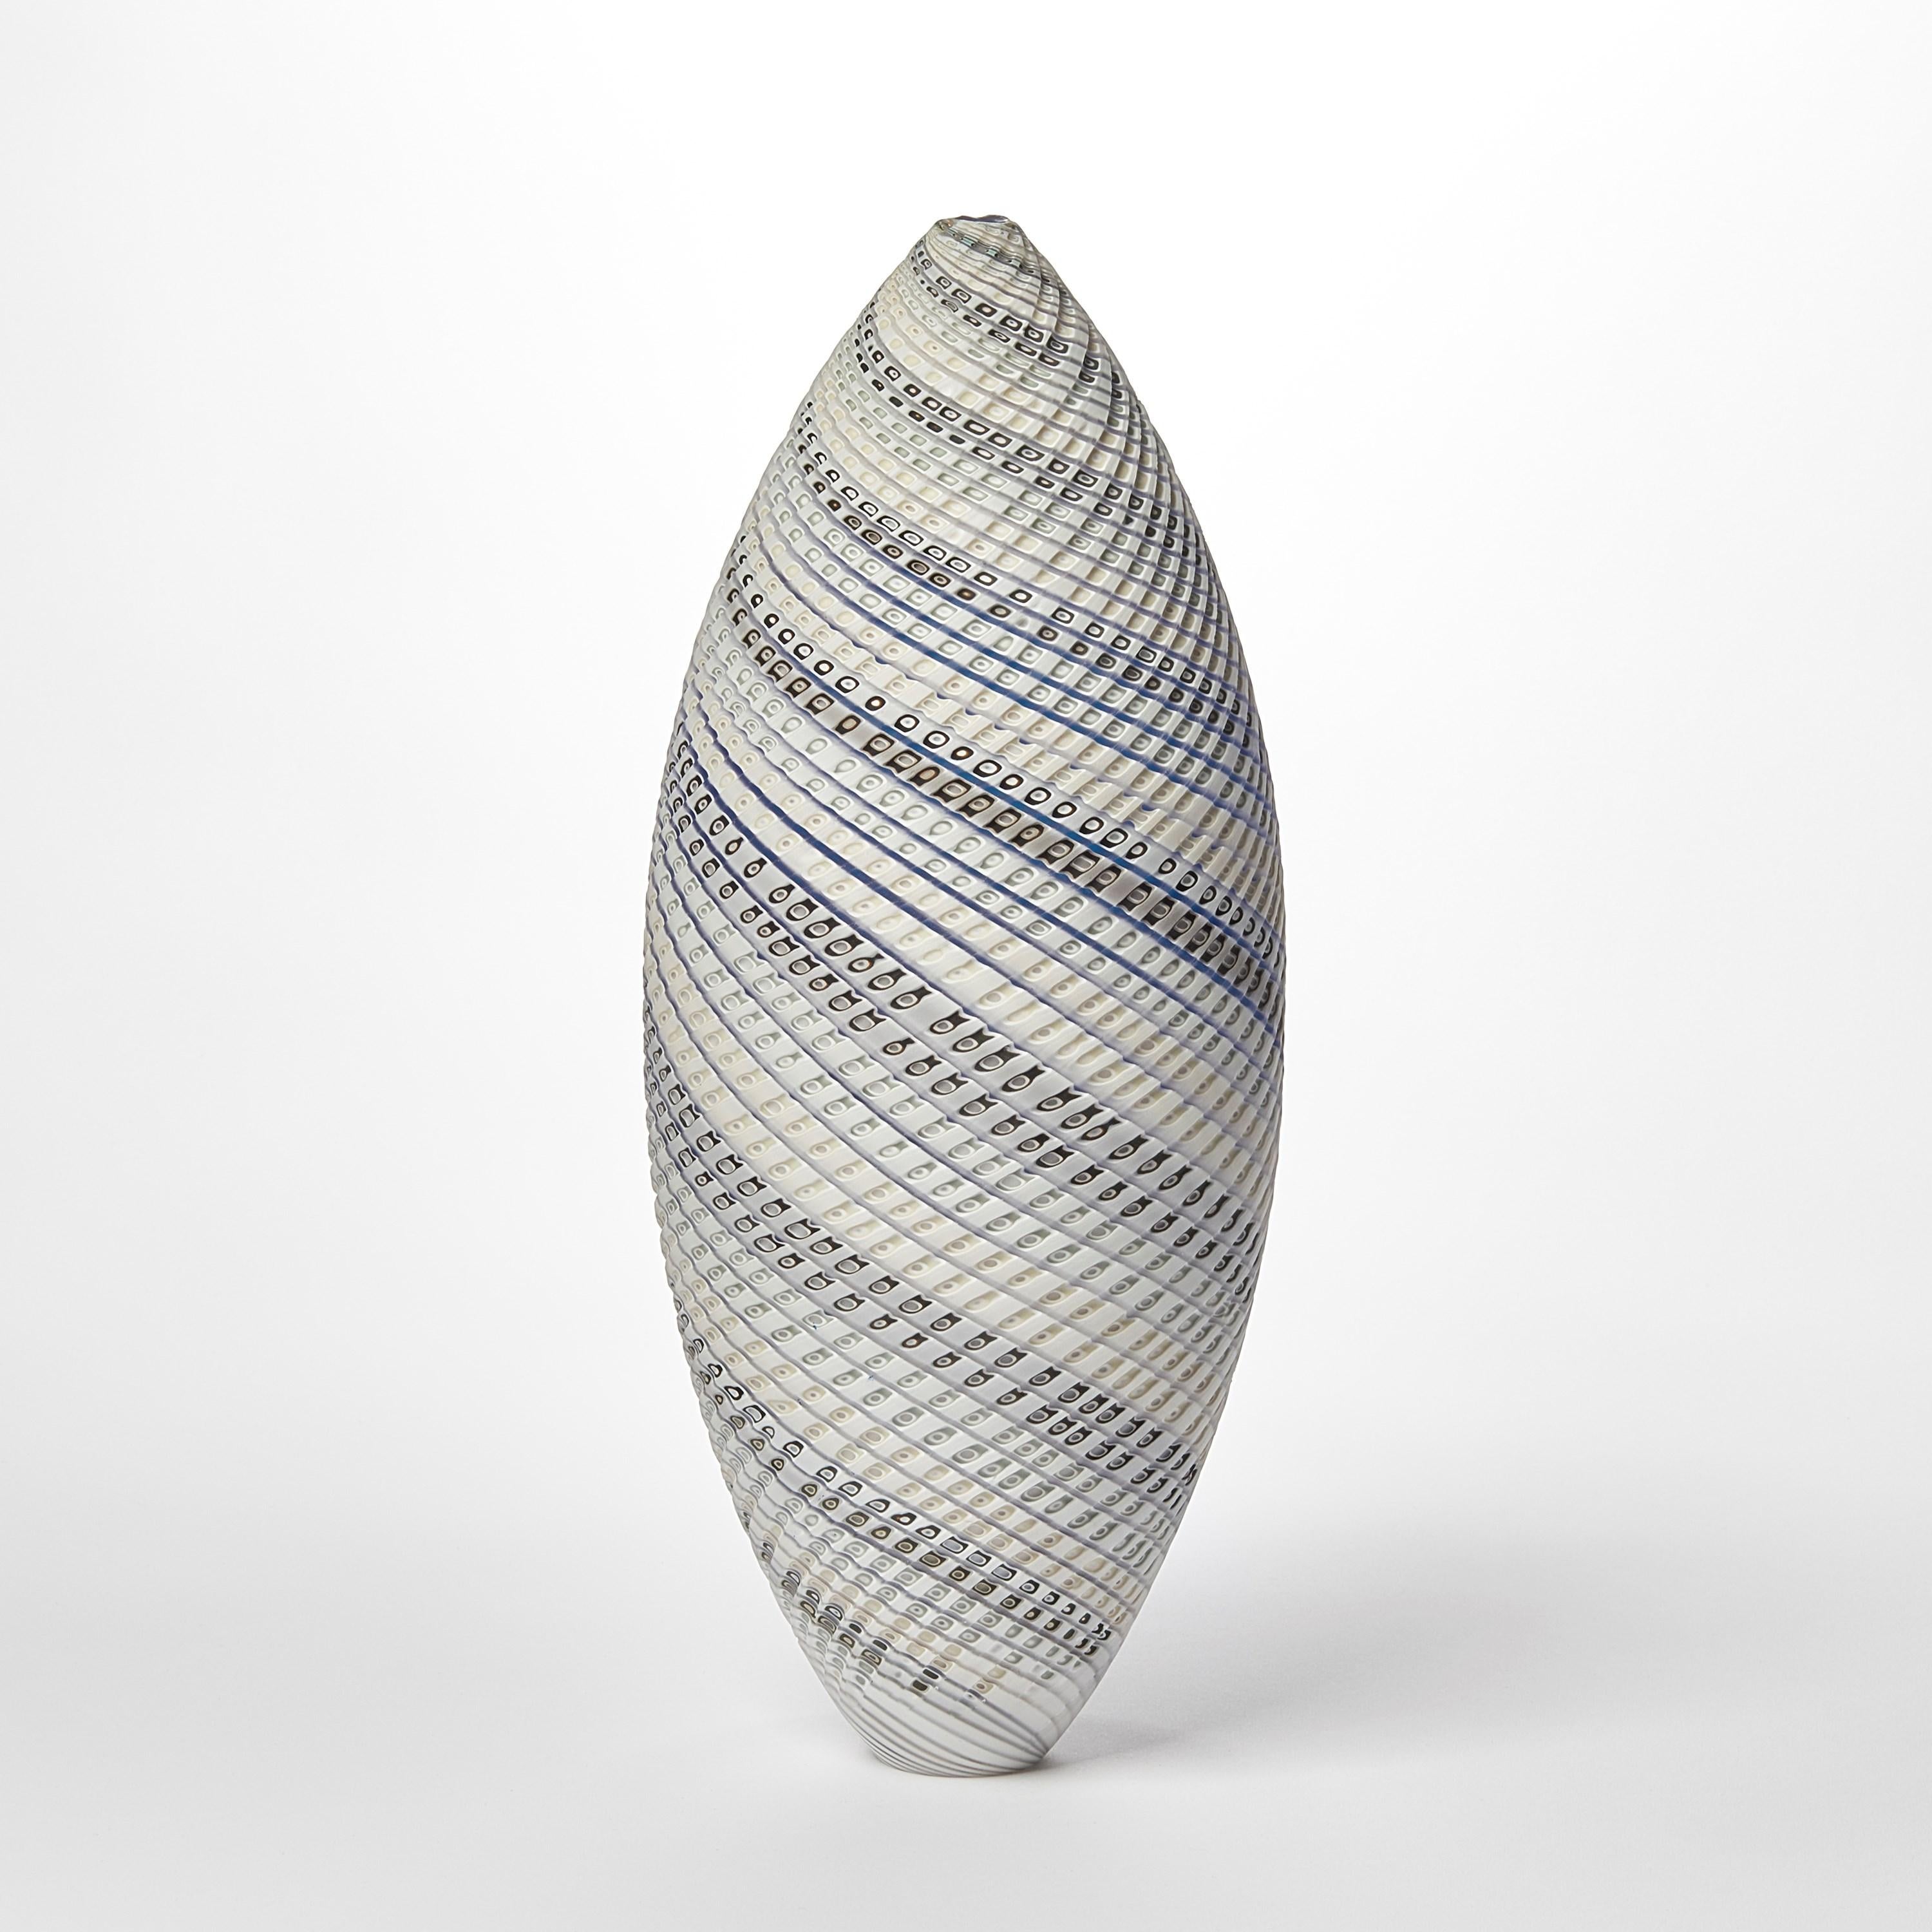 'Woven Three Tone Blue Ovoid (lg)' is a unique handblown, sculpted and cut glass sculpture by the British artist, Layne Rowe.

Rowe’s inspiration is drawn from the dramatic Devon coastline which informs his love for detail, a constant theme for his